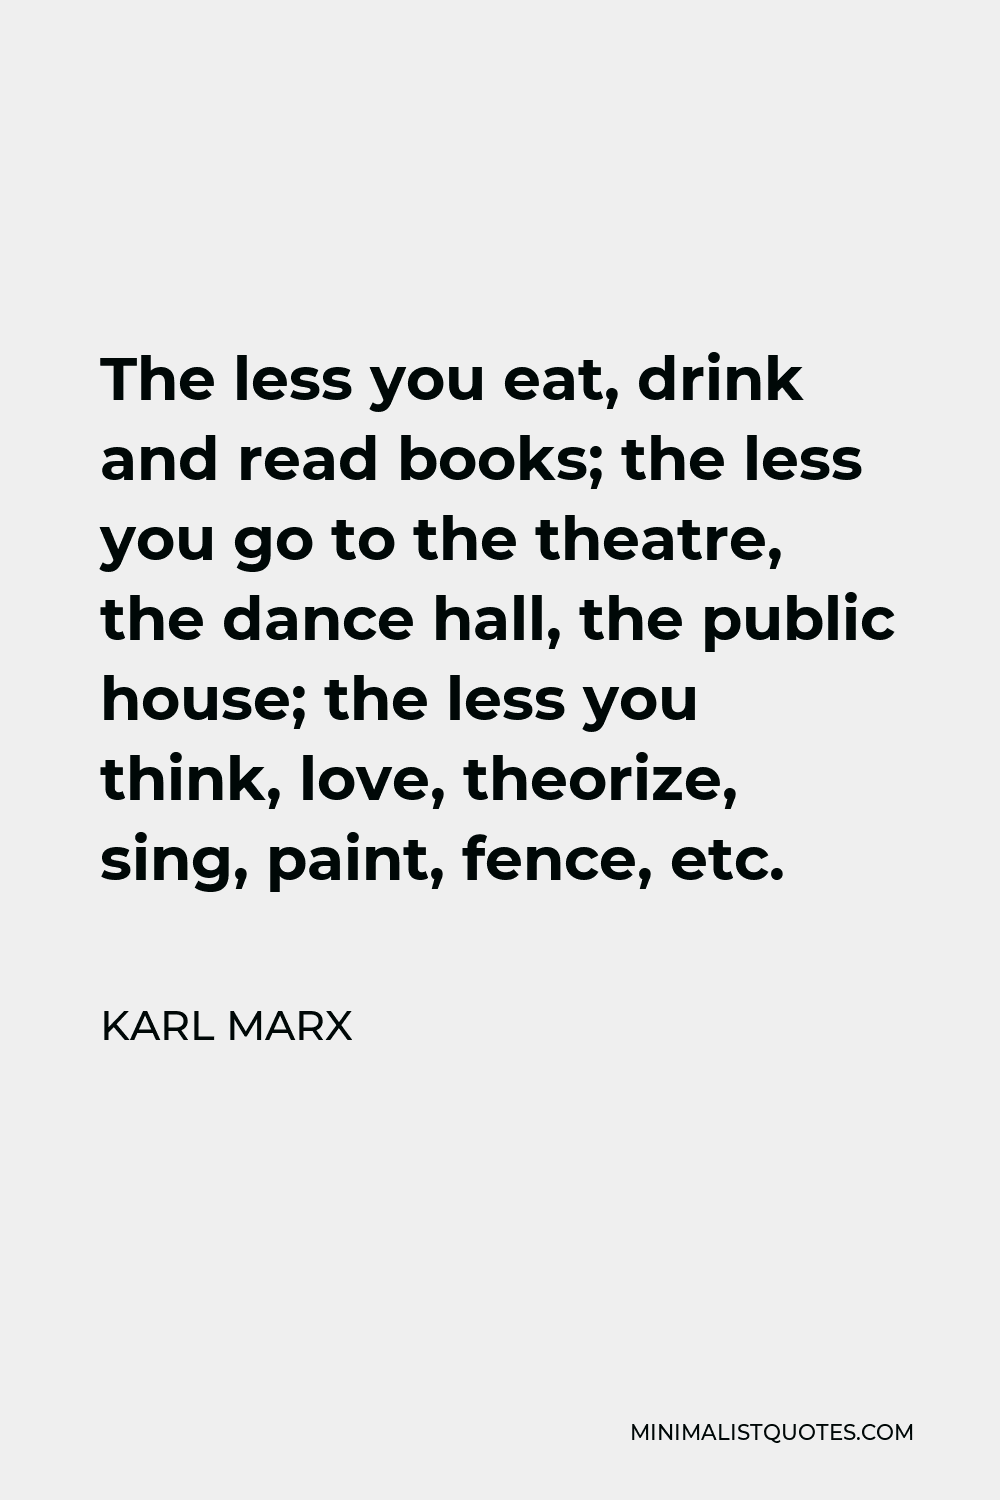 Karl Marx Quote - The less you eat, drink and read books; the less you go to the theatre, the dance hall, the public house; the less you think, love, theorize, sing, paint, fence, etc.